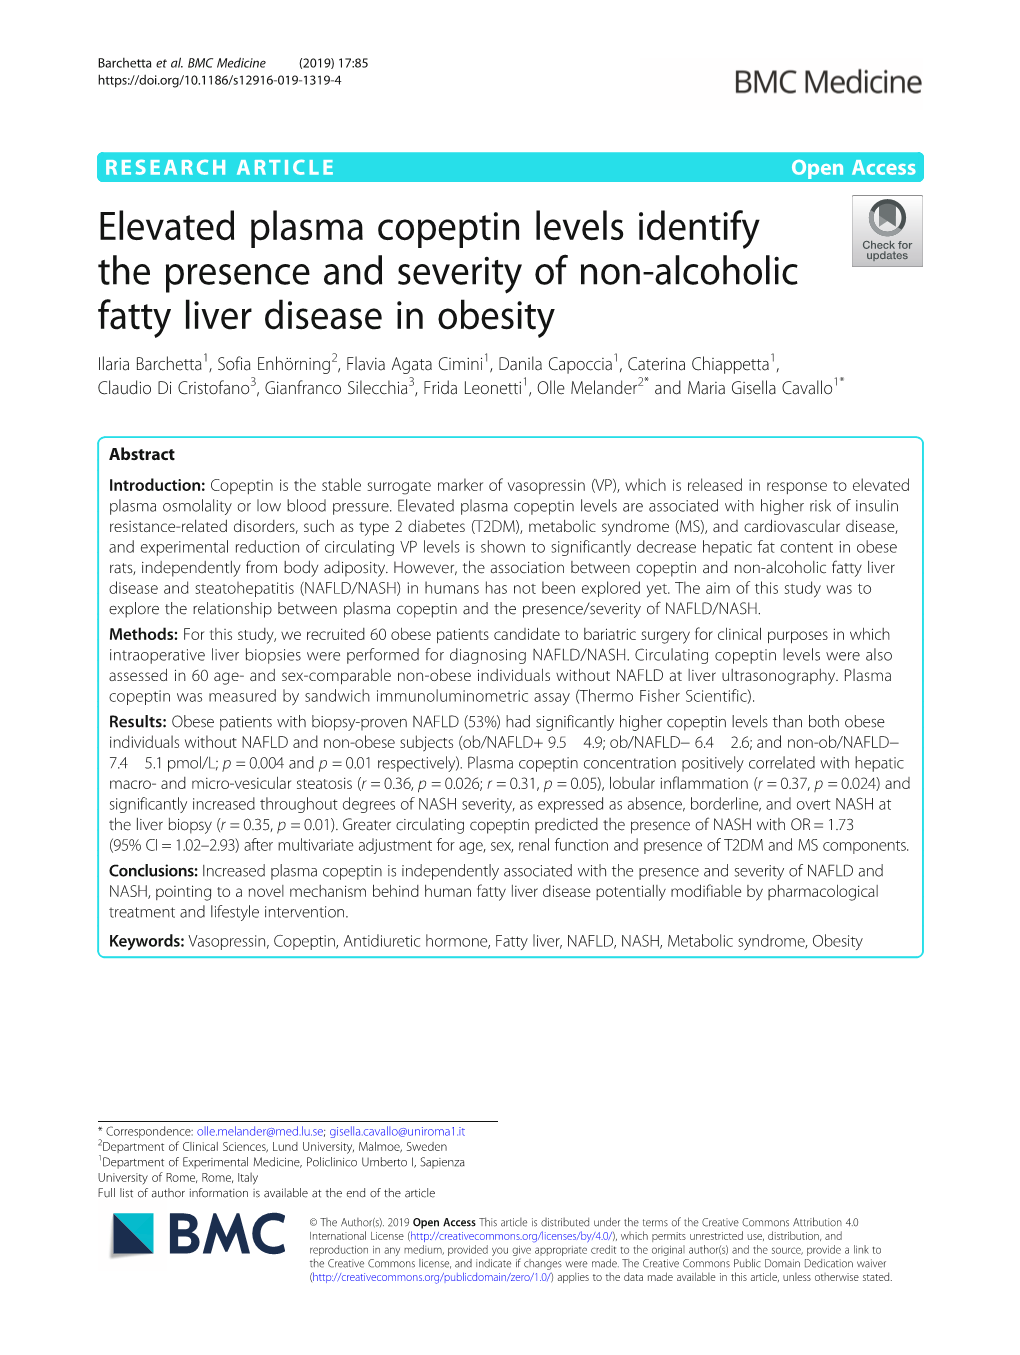 Elevated Plasma Copeptin Levels Identify the Presence and Severity Of